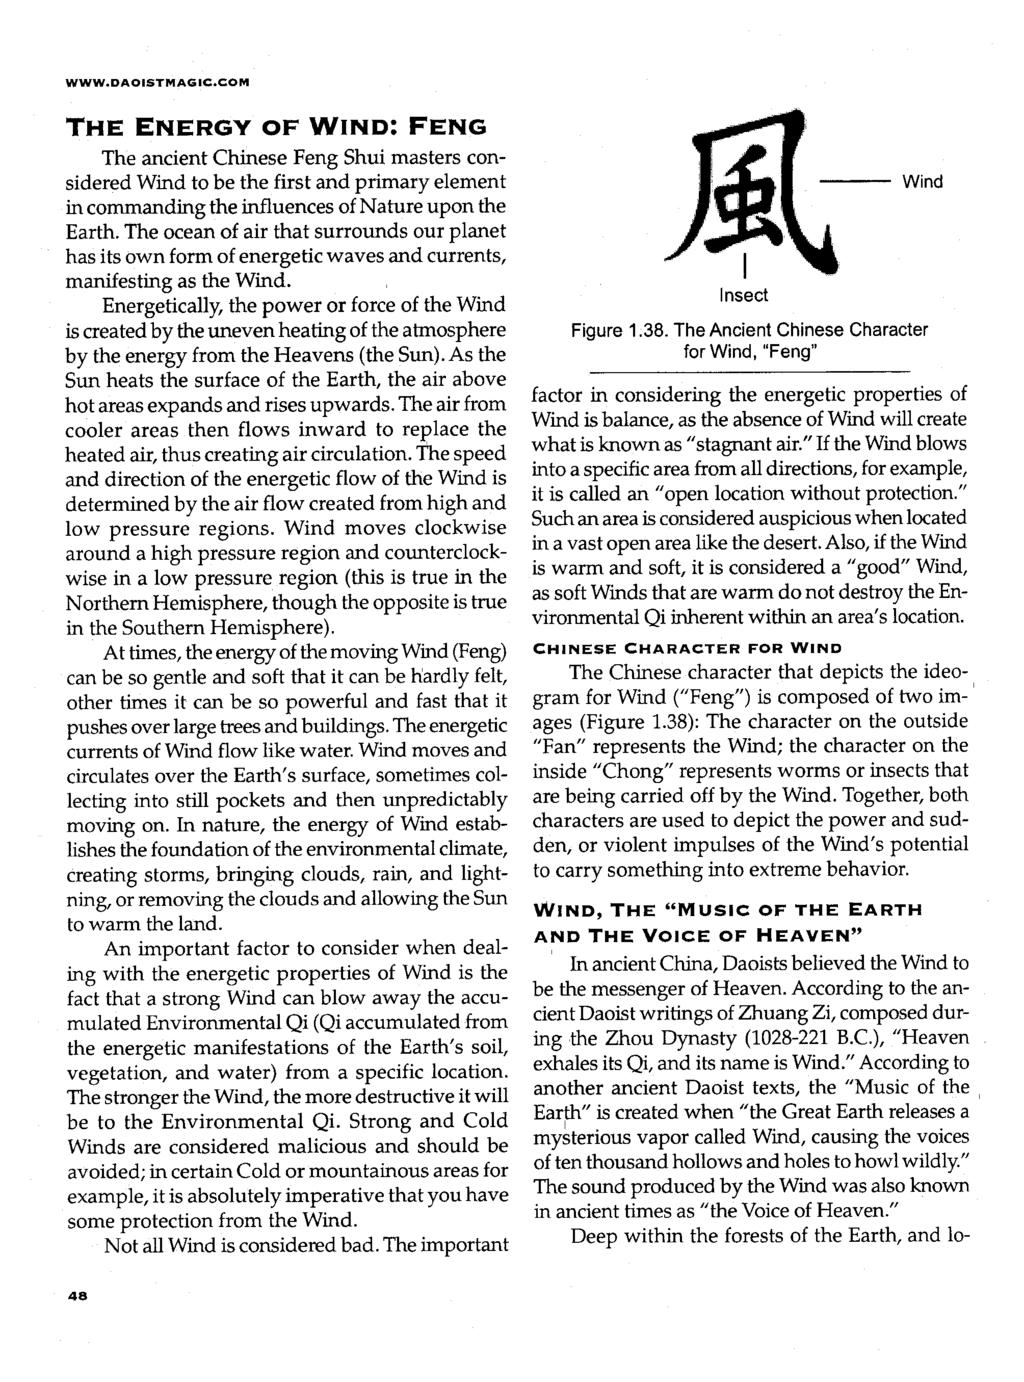 WWW.DAOISTMAGIC.COM THE ENERGY OF WIND: FENG The ancient Chinese Feng Shui masters considered Wind to be the first and primary element in commanding the influences of Nature upon the Earth.